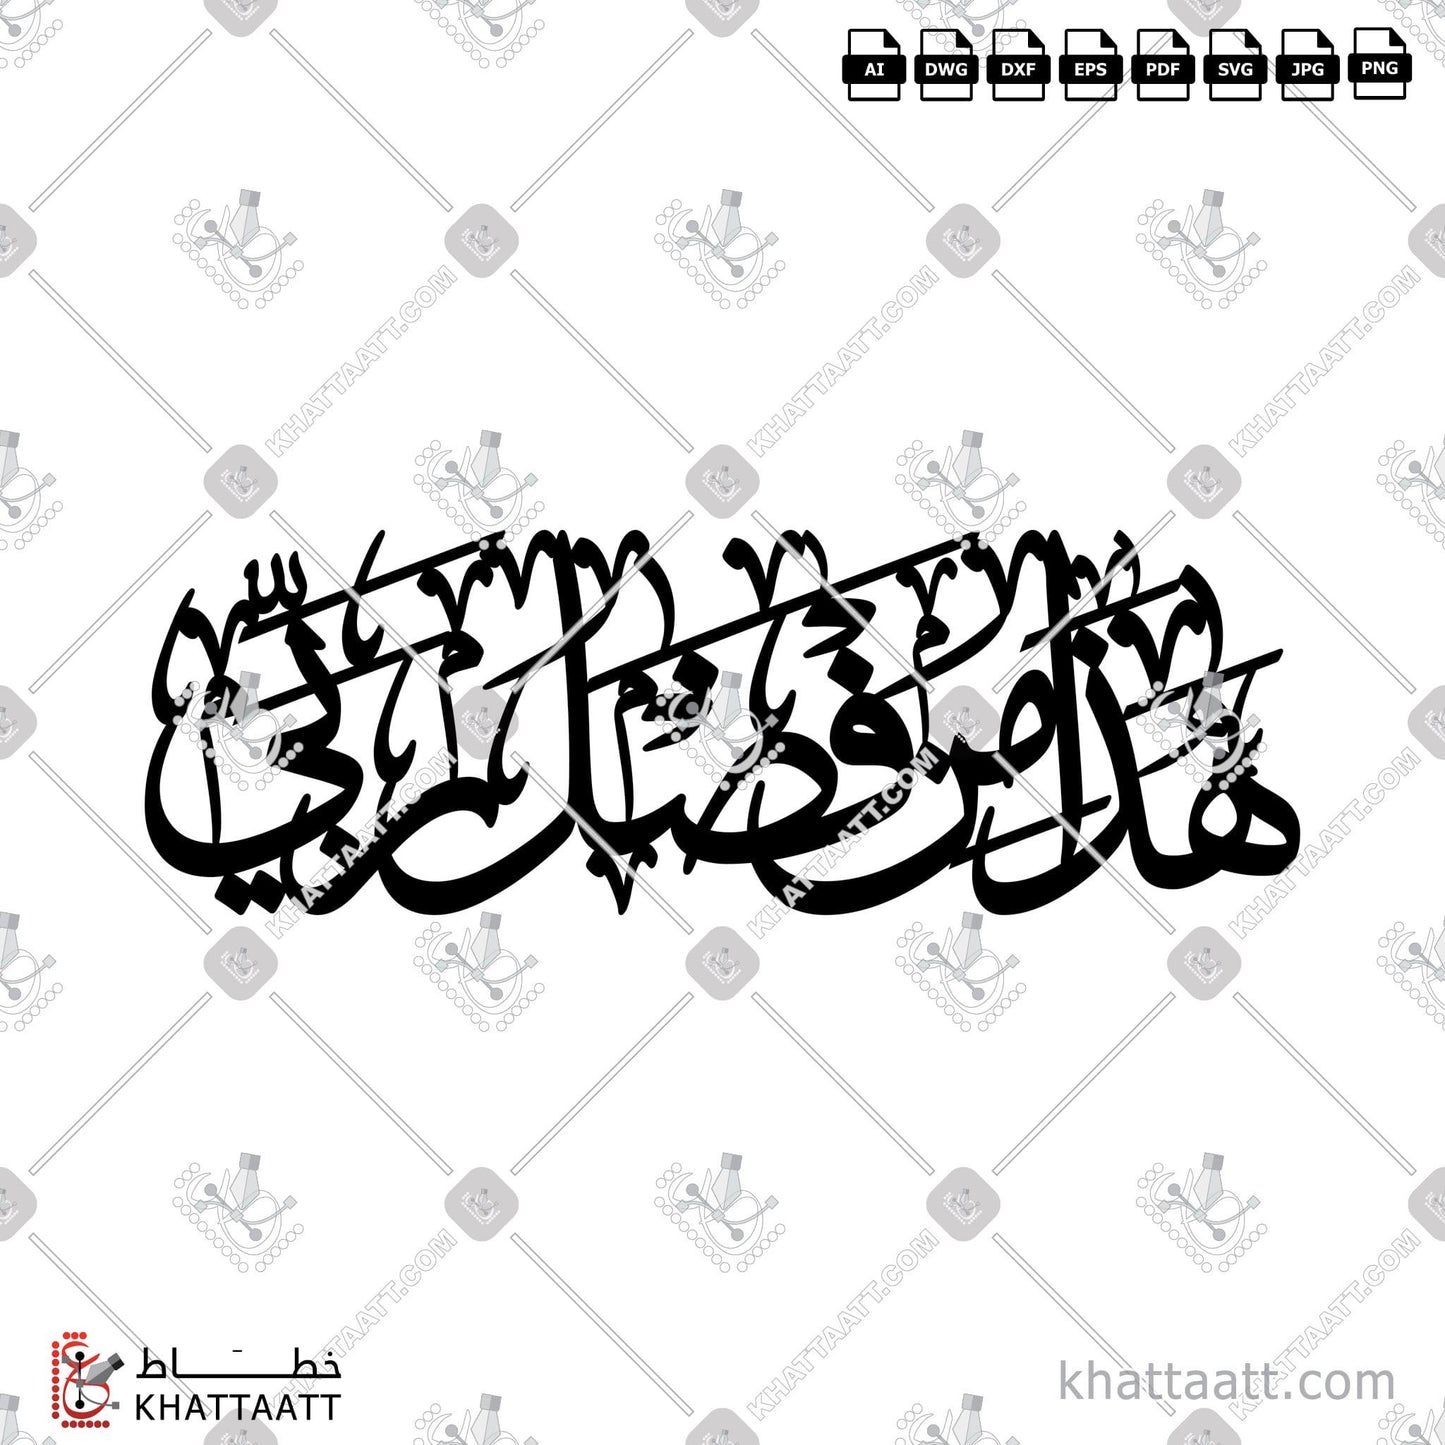 Download Arabic Calligraphy of هذا من فضل ربي in Thuluth - خط الثلث in vector and .png